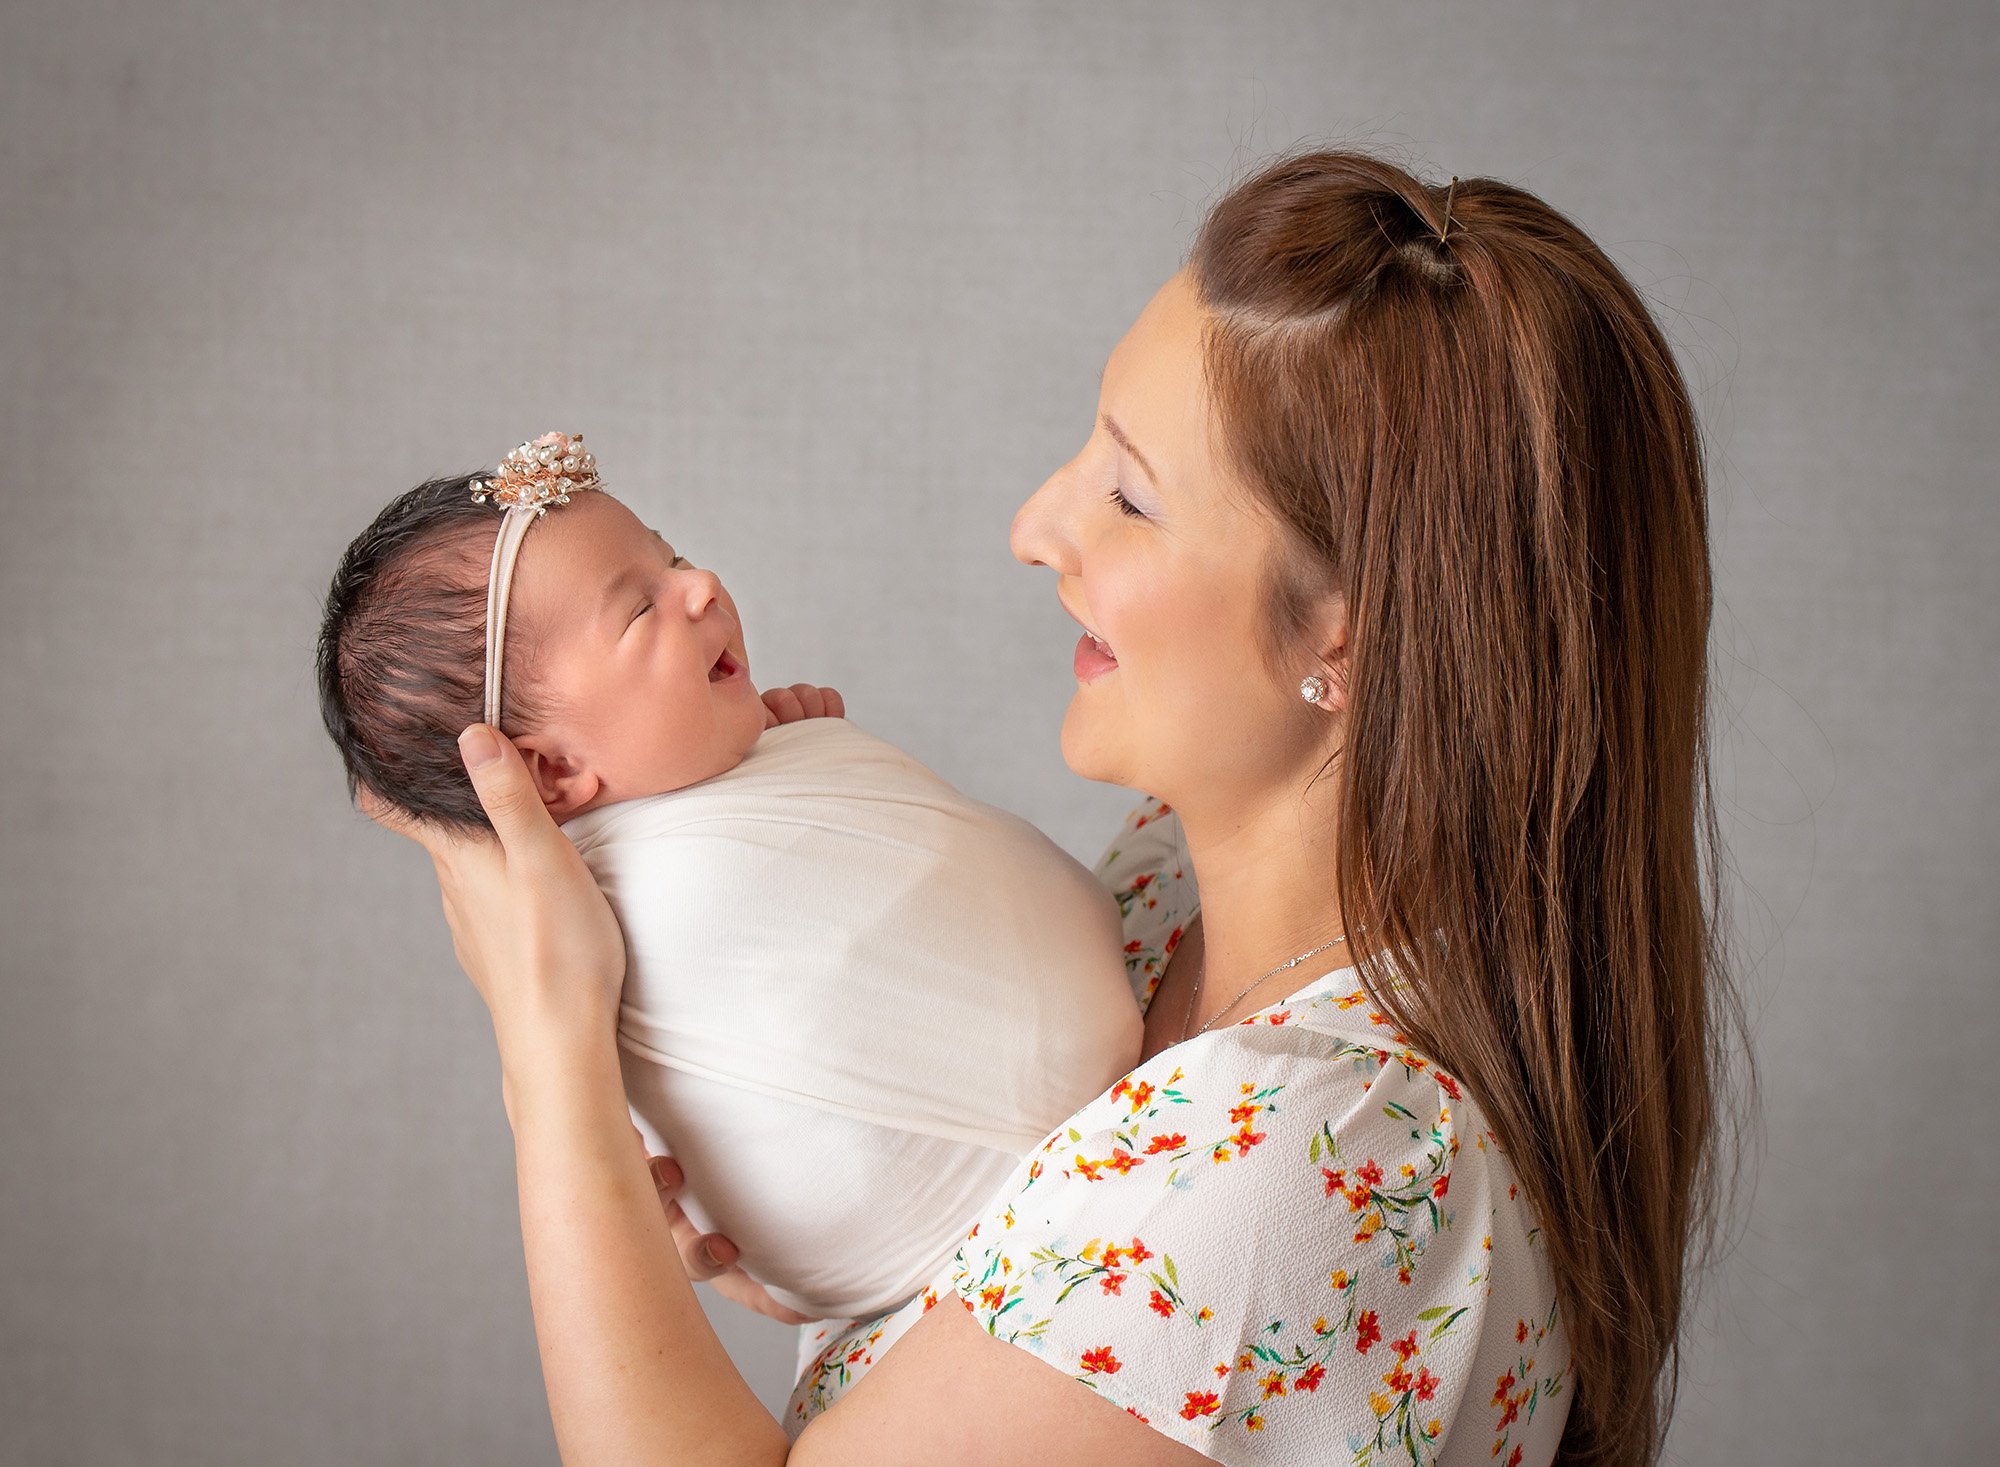 mother smiling at newborn baby girl swaddled in white wearing floral headband on gray backdrop